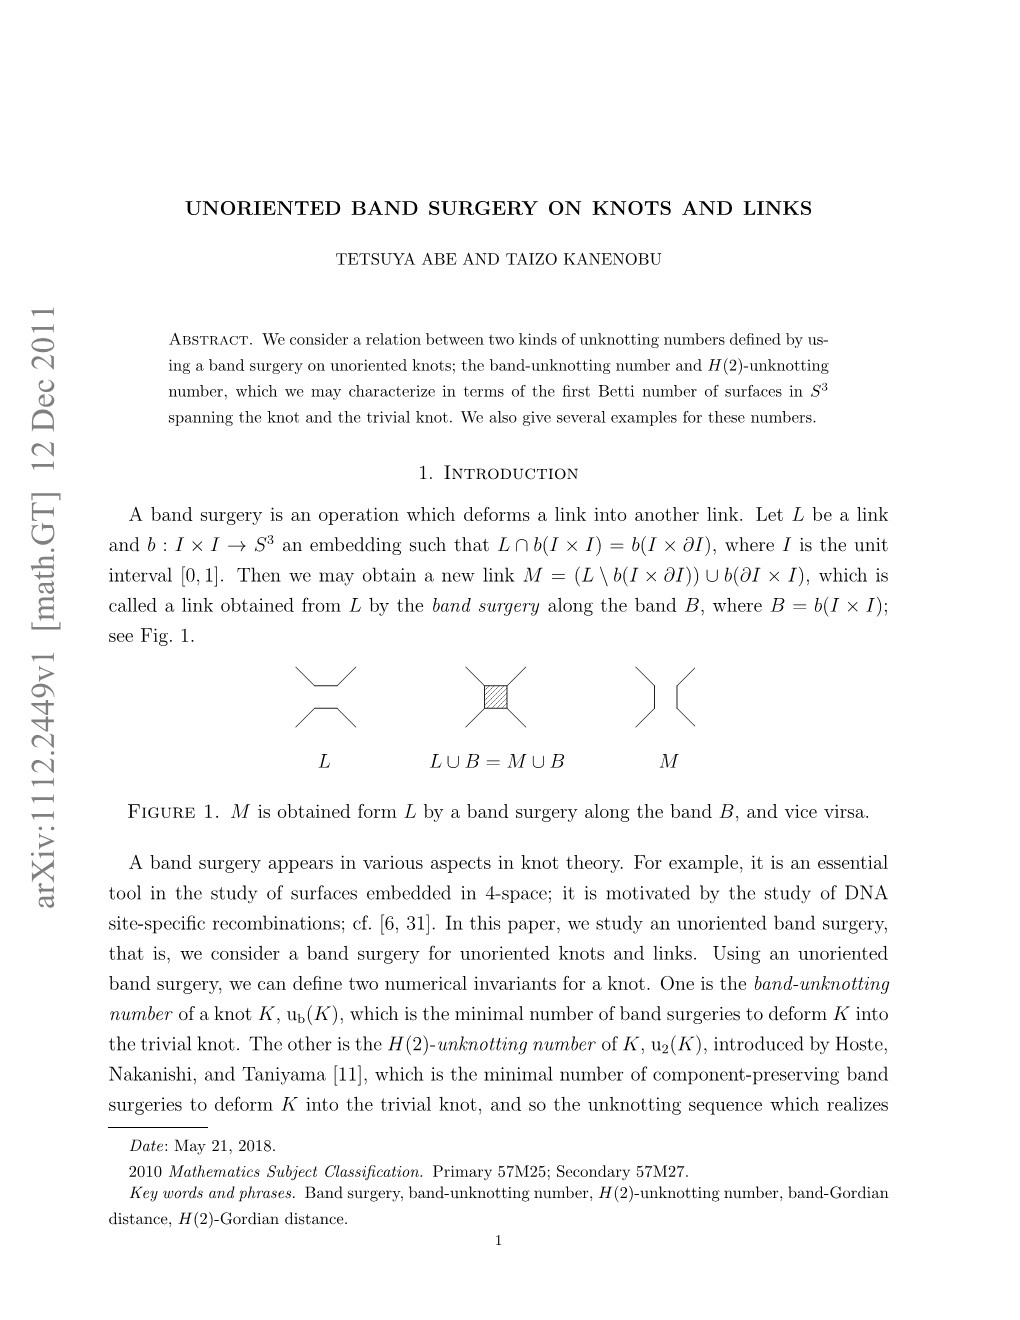 Arxiv:1112.2449V1 [Math.GT] 12 Dec 2011 Nevl[0 Interval Aldaln Bandfrom Obtained Link a Called and E I.1